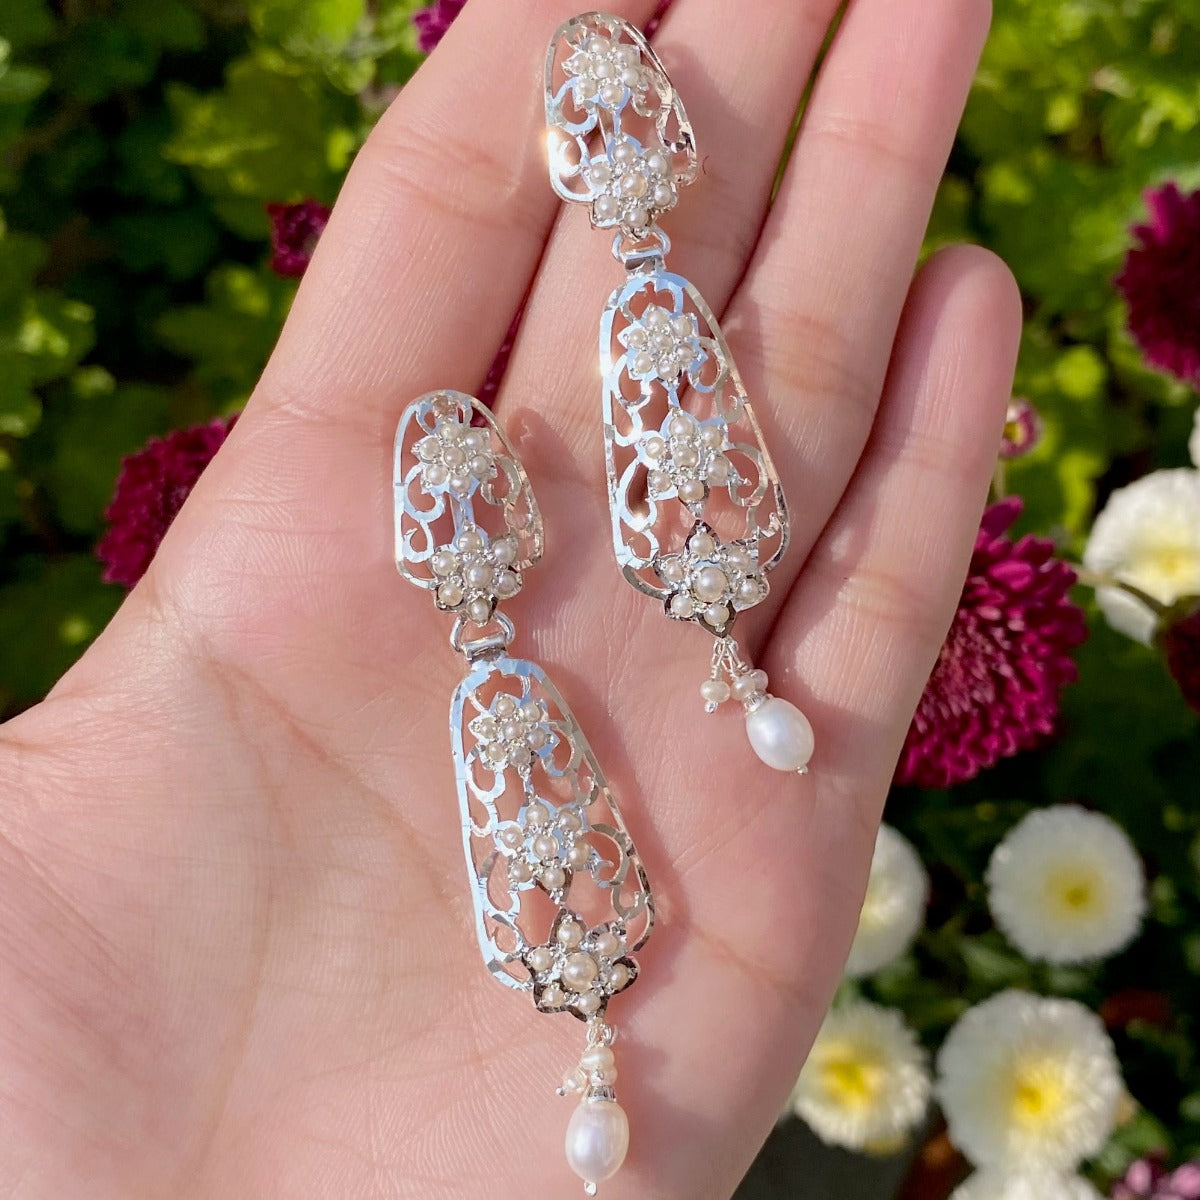 pure sterling silver earrings with white stones